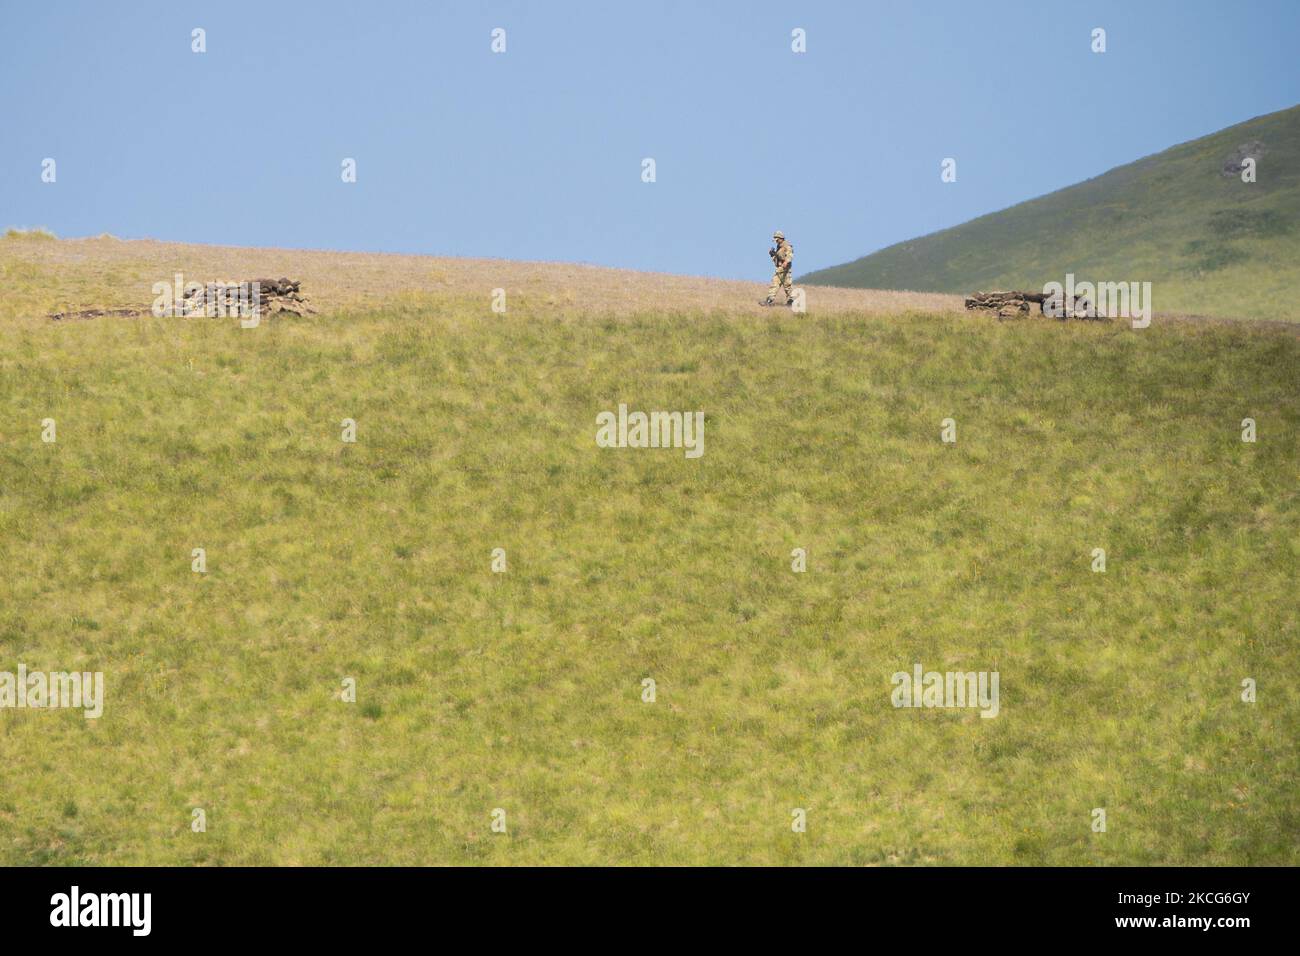 Azeri soldier patrols from an advanced detachment inside the armenian territory in the Gegharkunik province, Armenia. Azerbaijan army is interned some kilometers from the oficial border between Armenia and Azerbaijan. Distances between soldiers are only 50 meters in some cases. (Photo by Celestino Arce/NurPhoto) Stock Photo